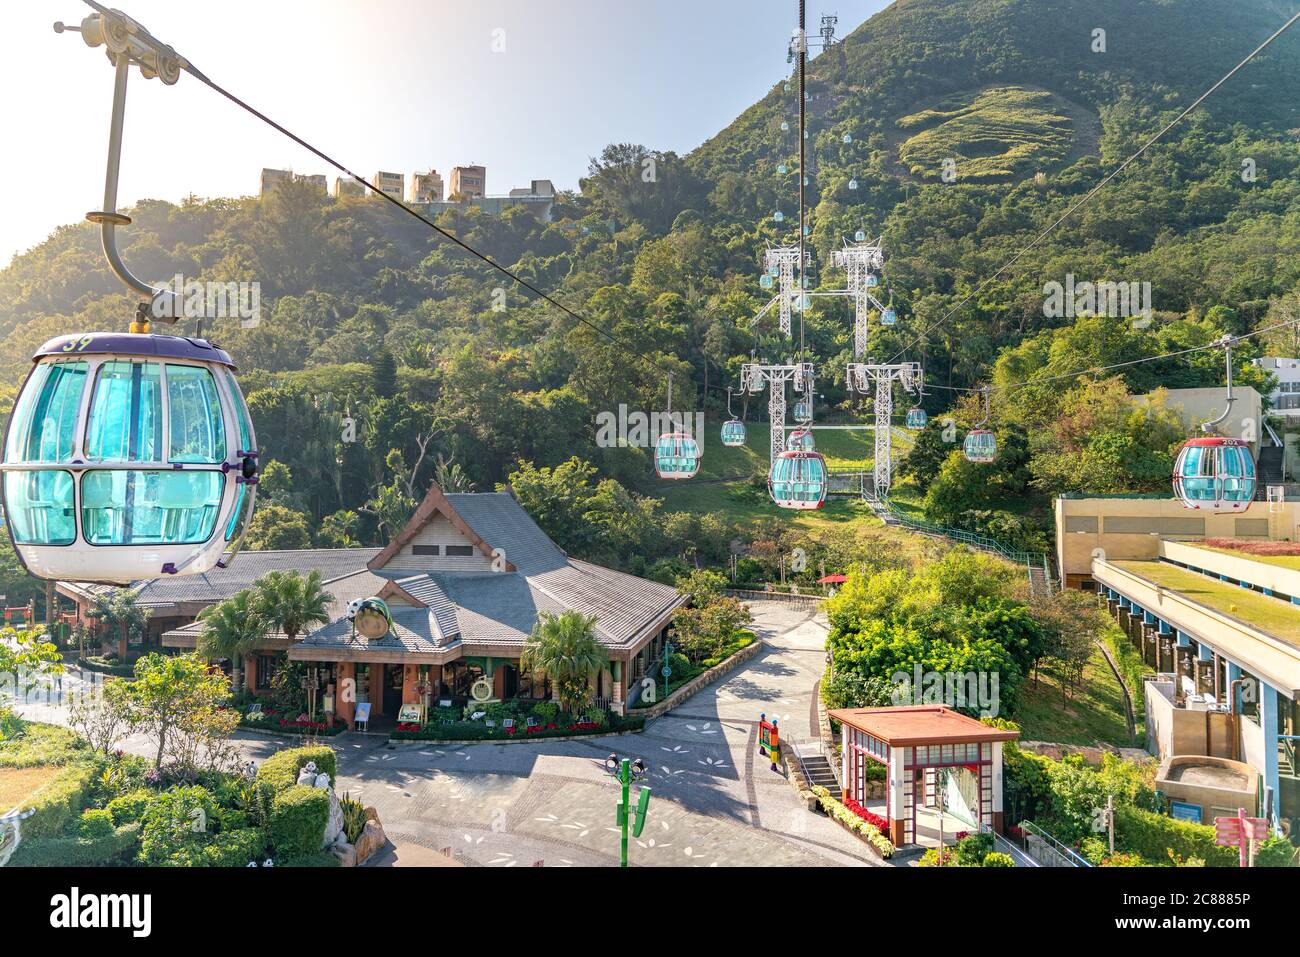 The sunny view of cable car and theme park near to ocean Stock Photo